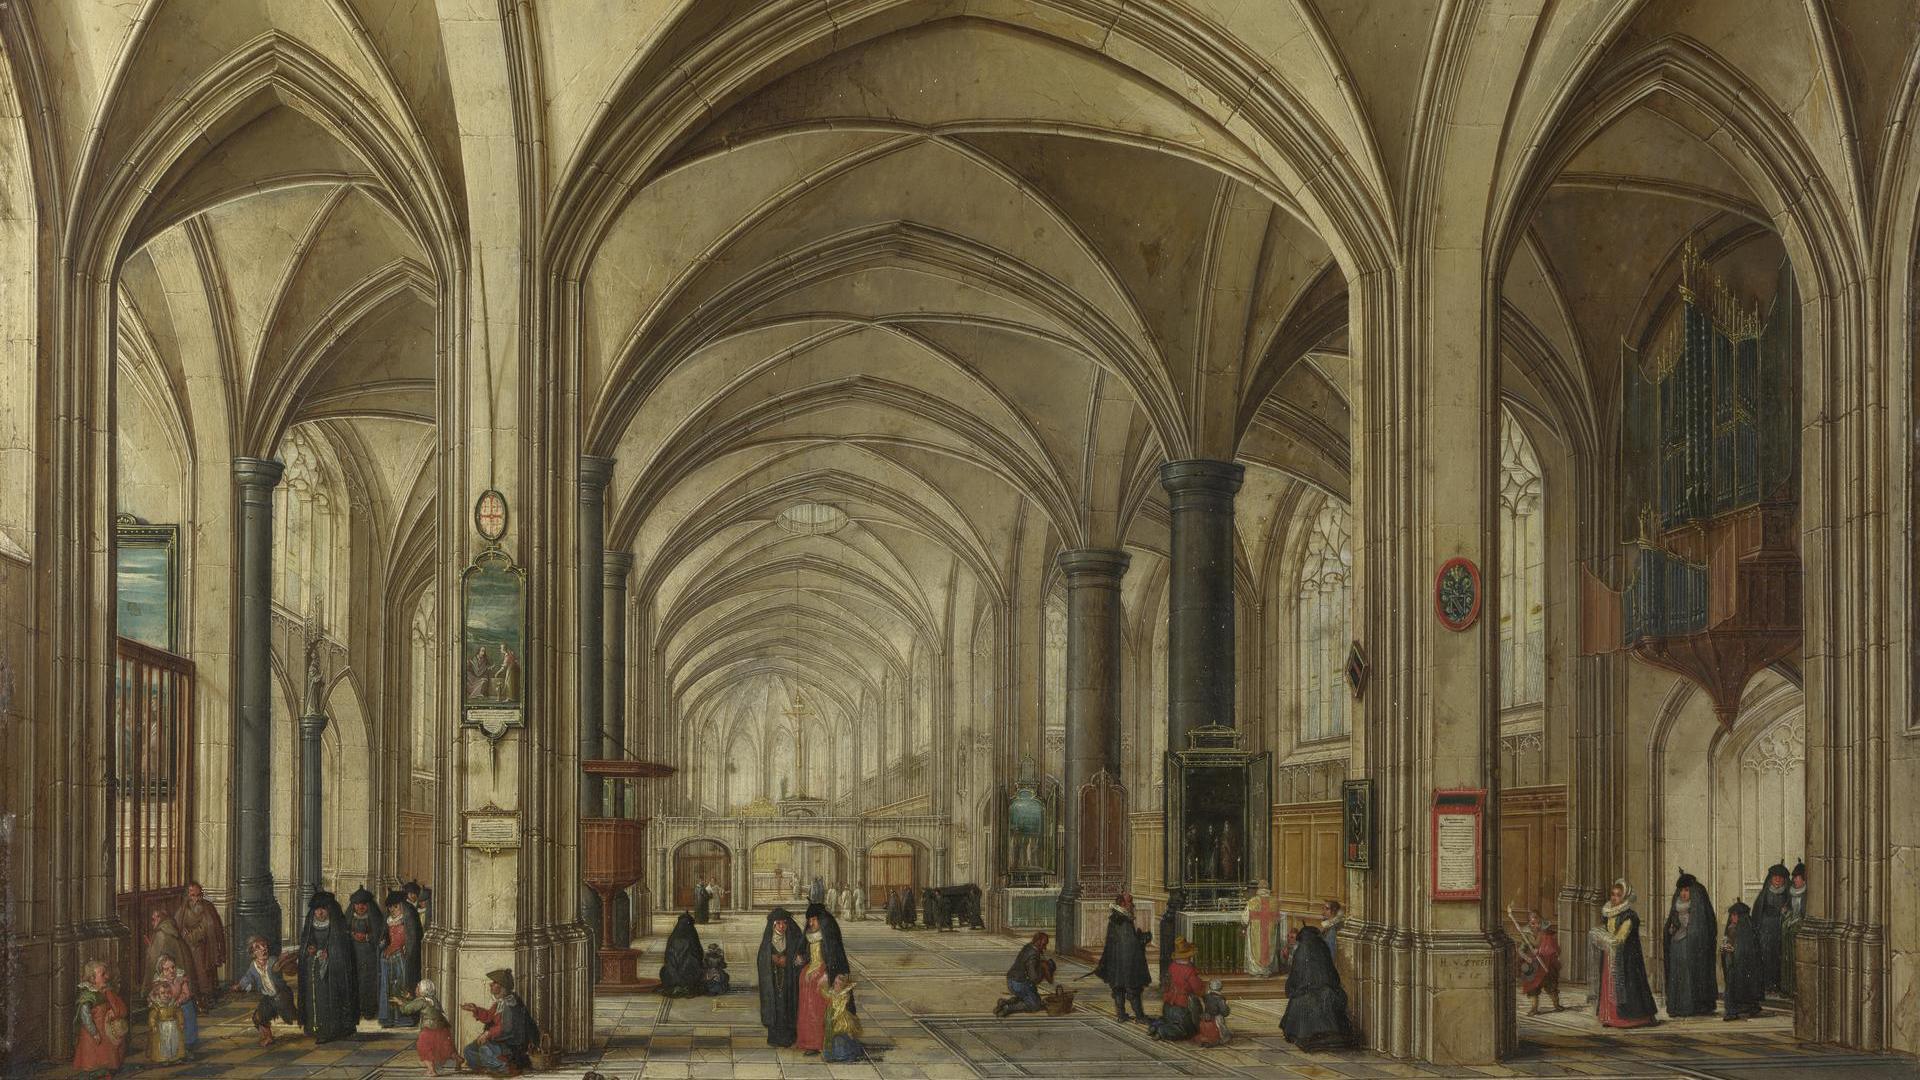 The Interior of a Gothic Church looking East by Hendrick van Steenwyck the Younger and Jan Brueghel the Elder